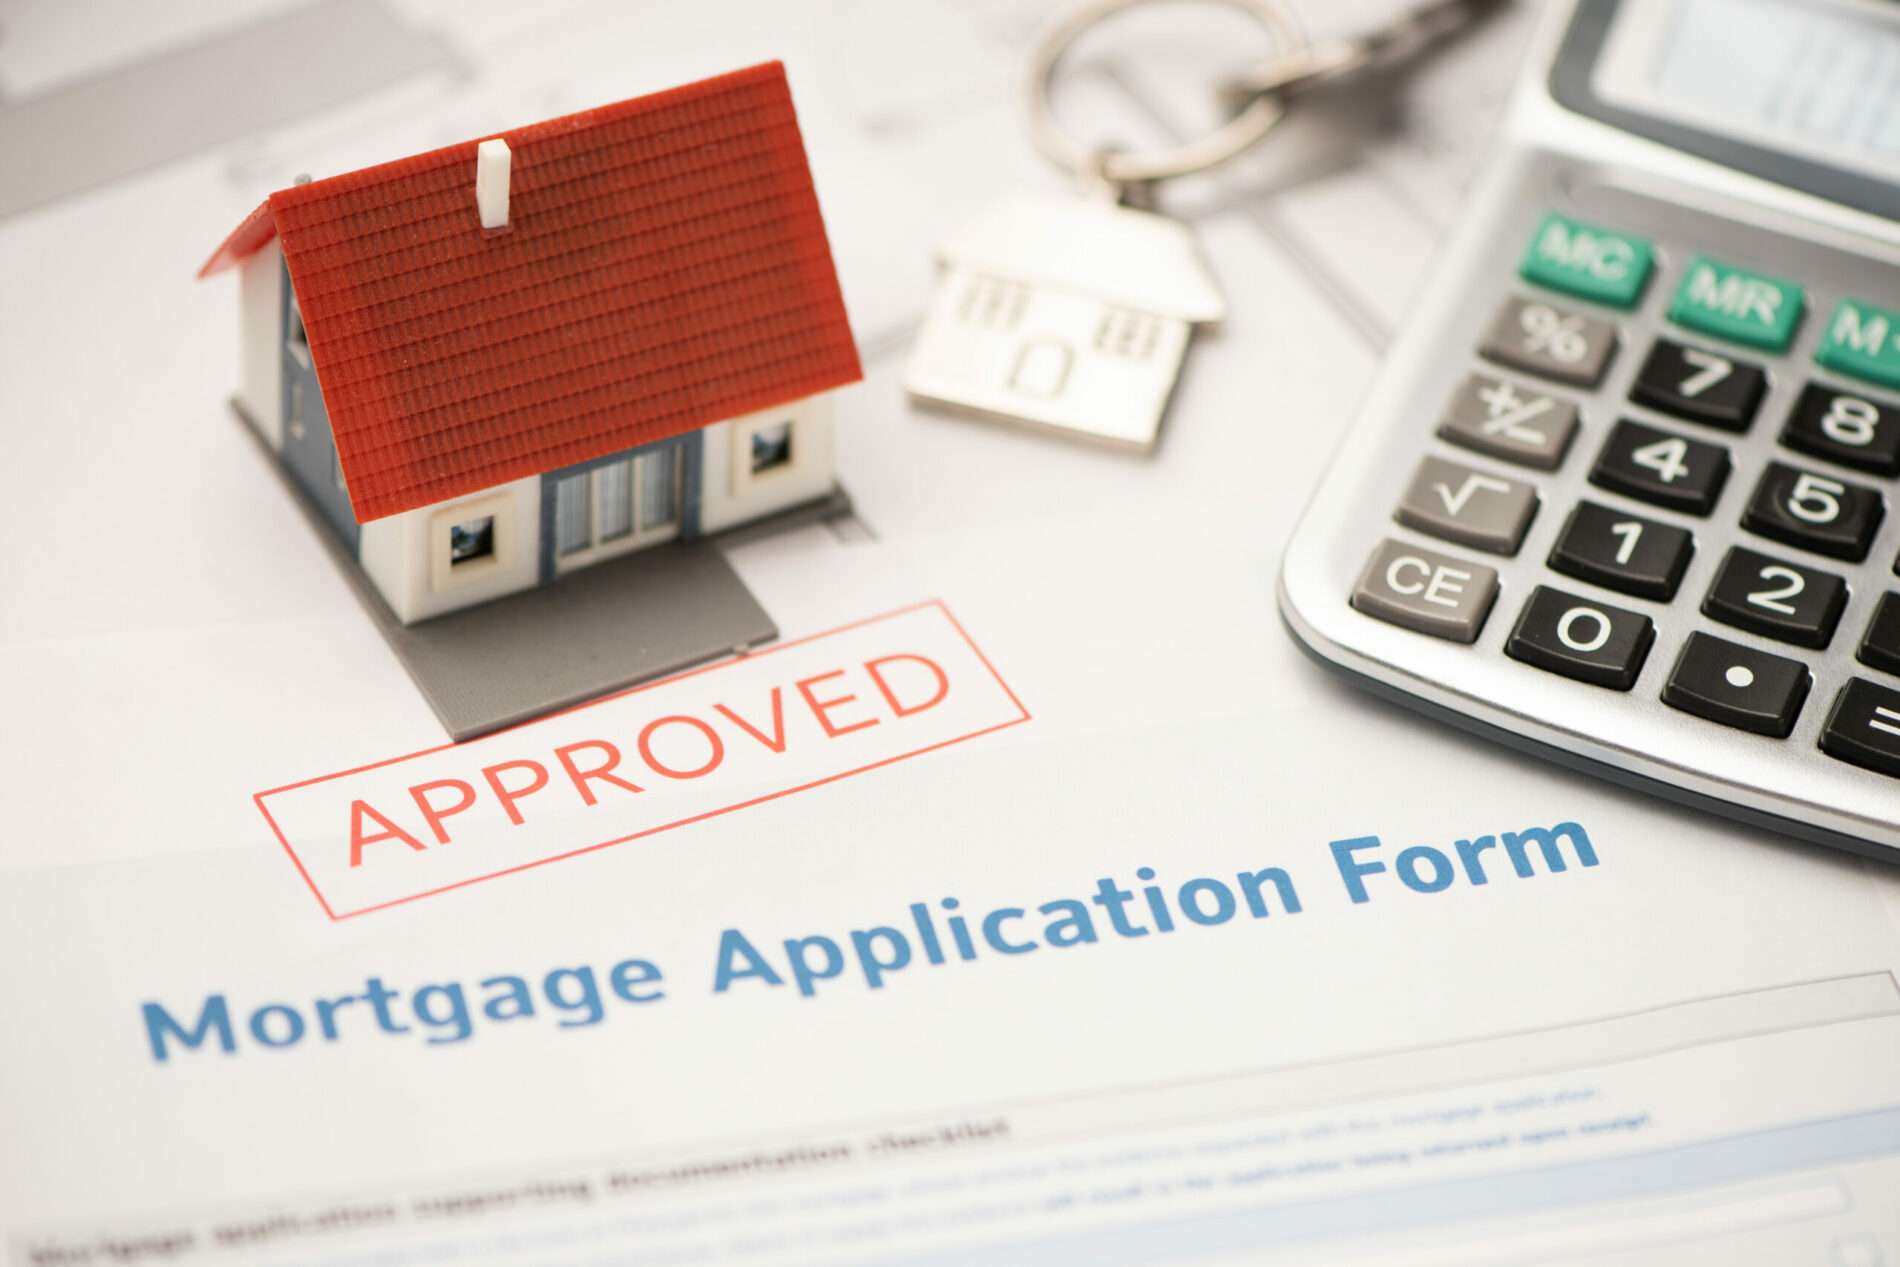 Are you eligible for a mortgage with a low down payment?